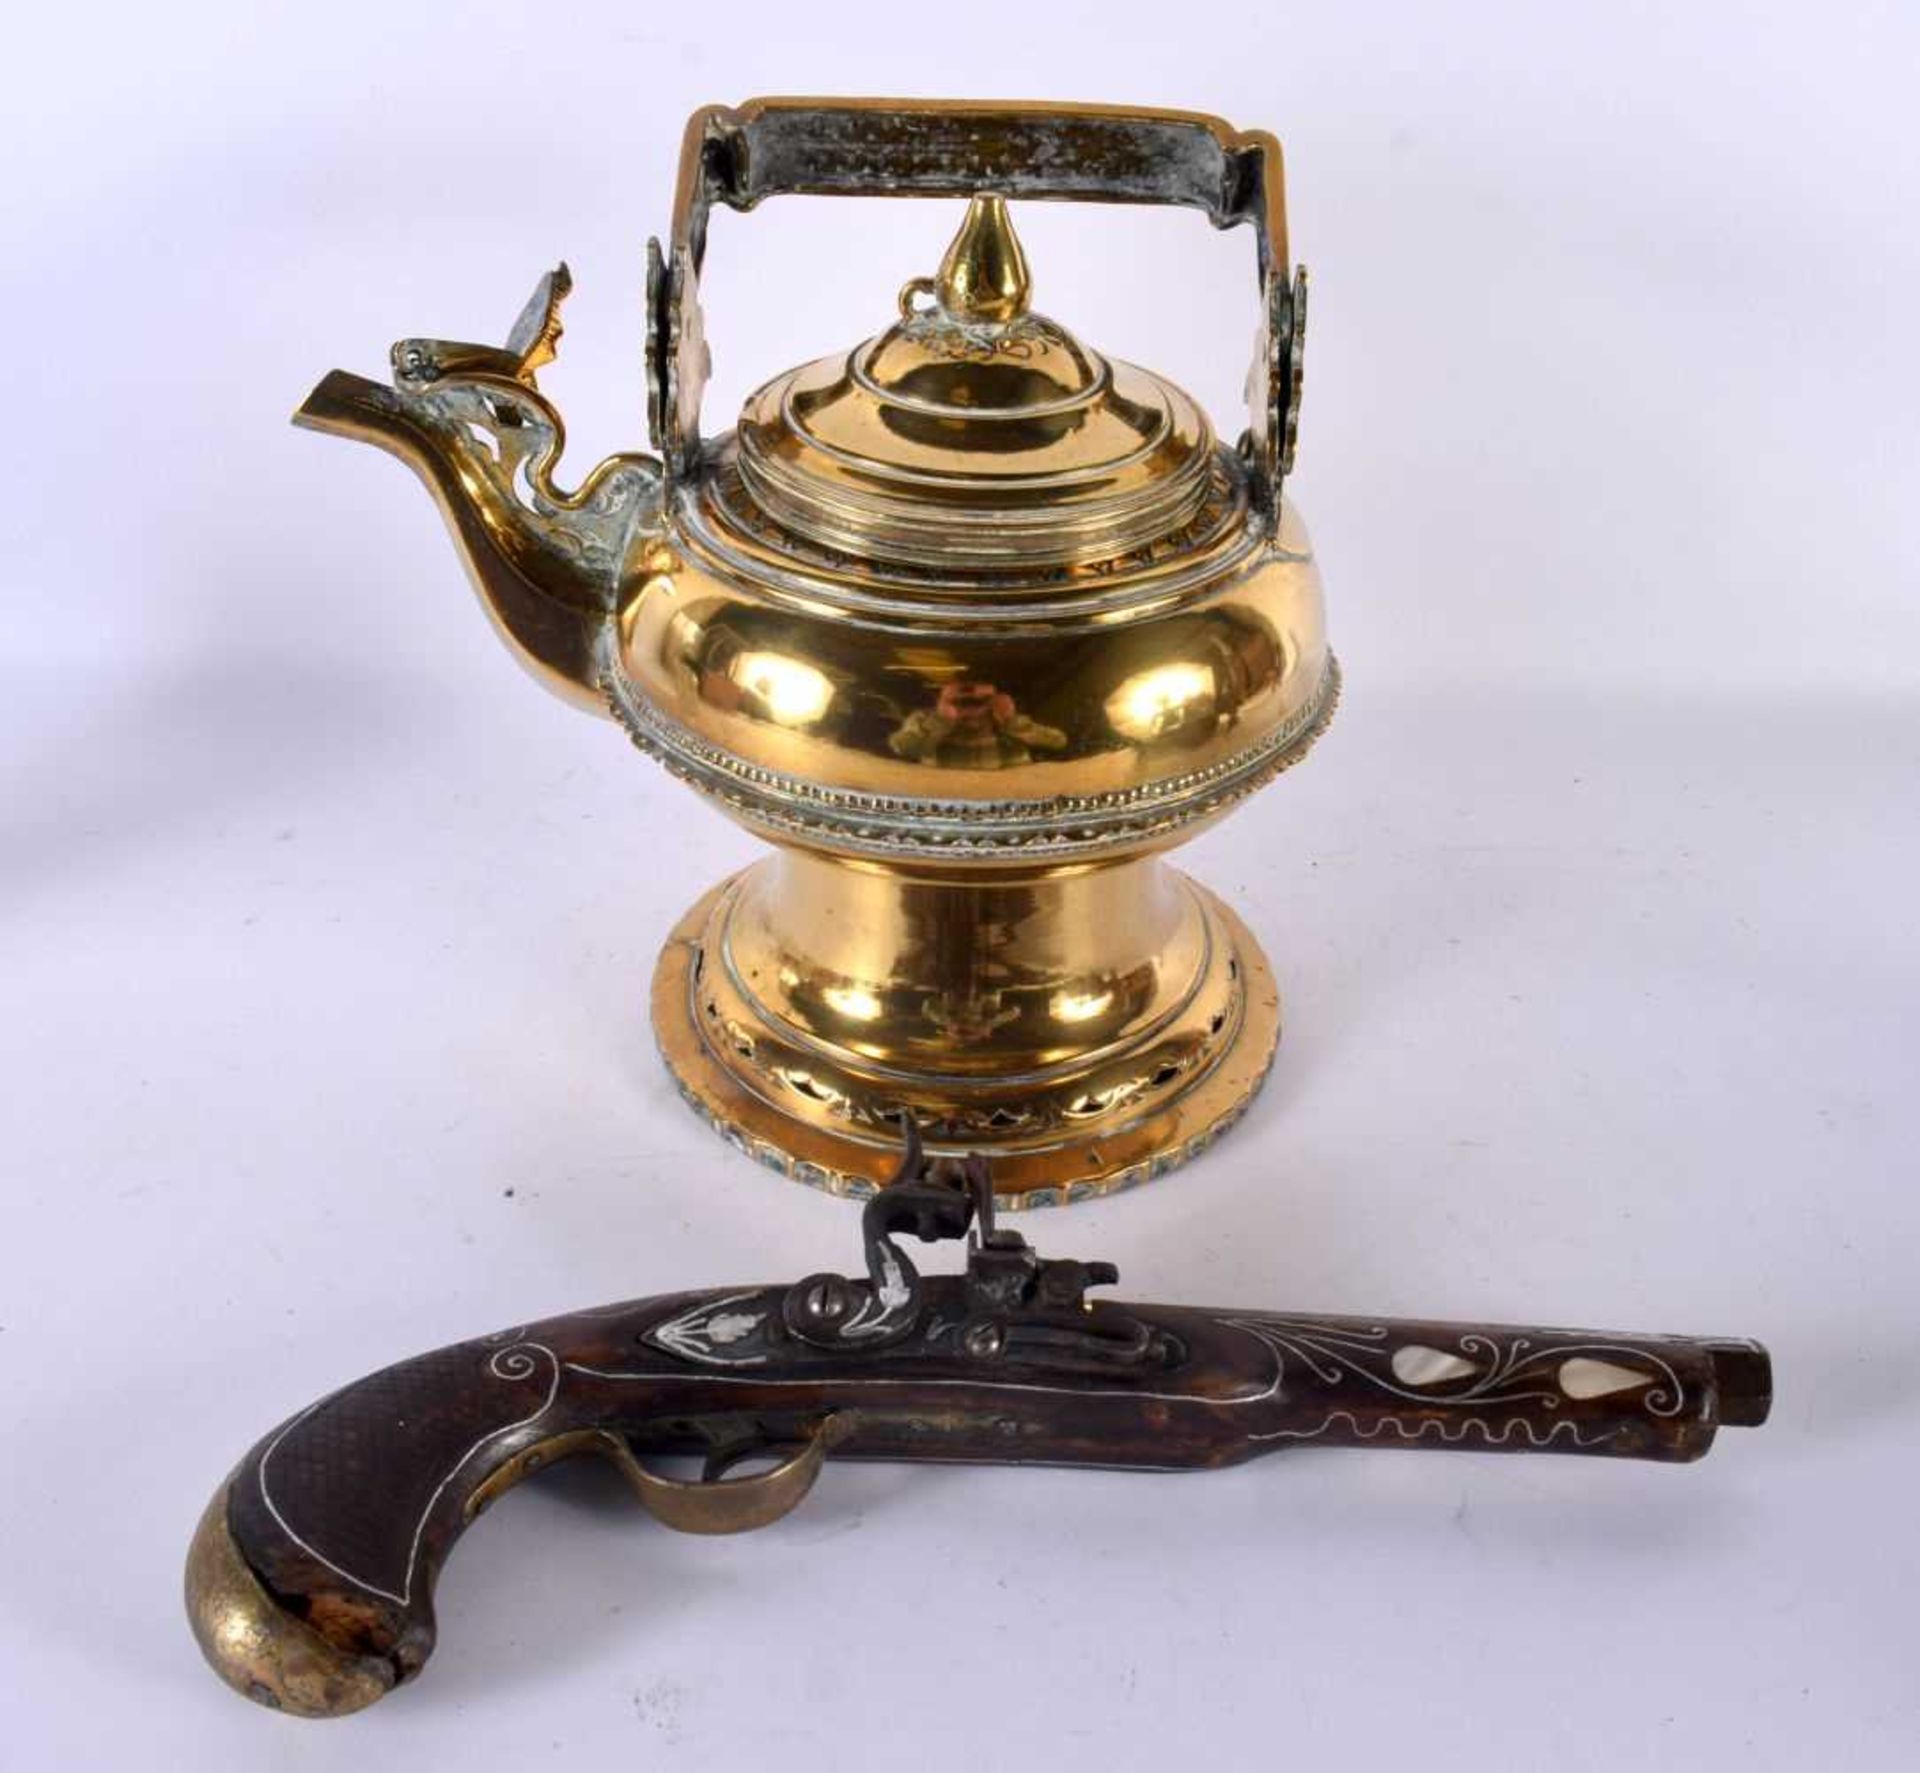 A TURKISH MOTHER OF PEARL INLAID PISTOL together with a Middle Eastern bronze teapot and cover.